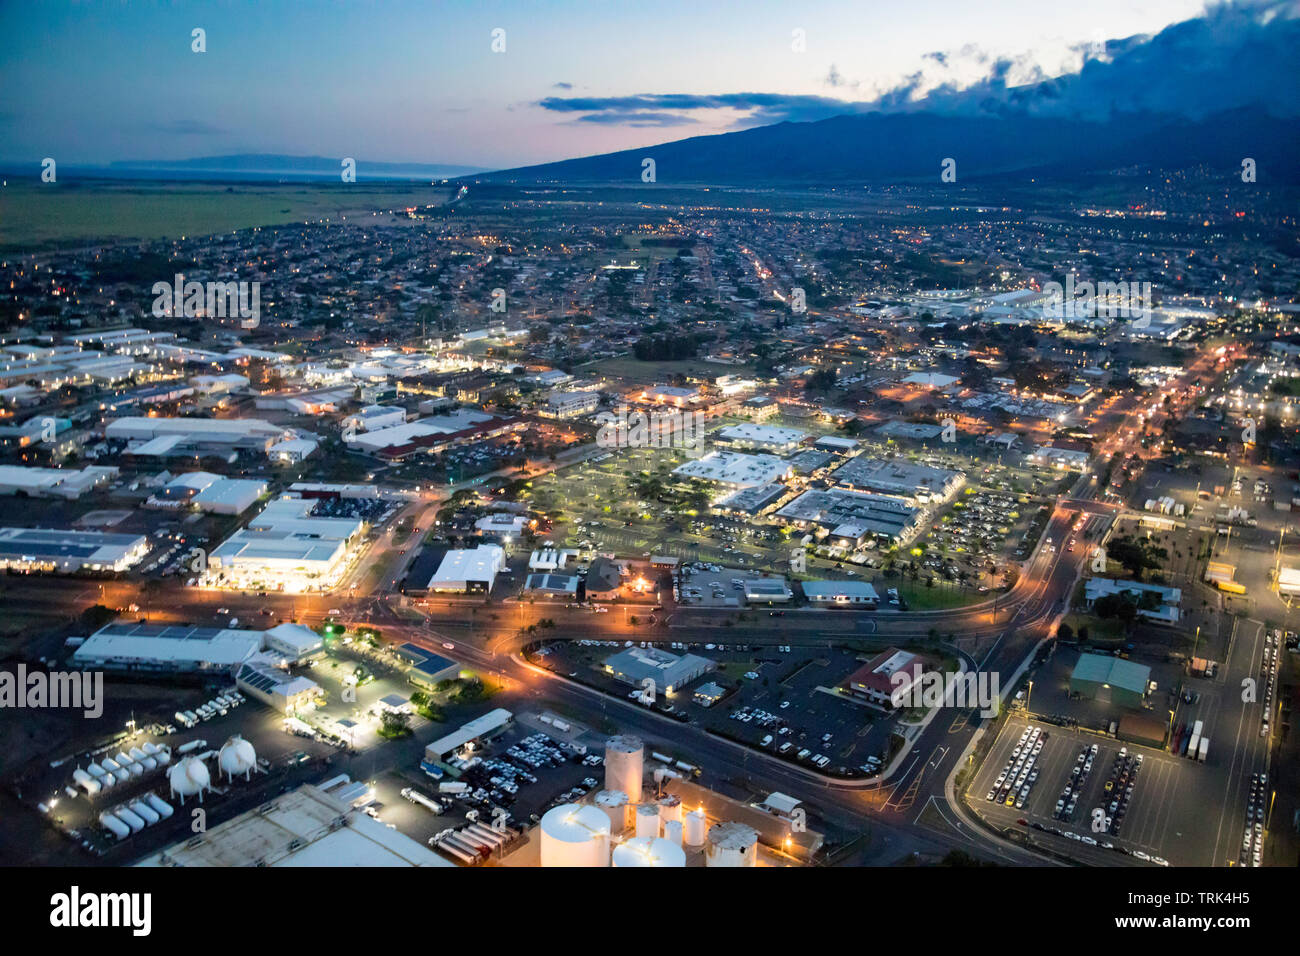 The town of Kahului, Maui, Hawaii, with the Maui Mall in the foreground. Stock Photo